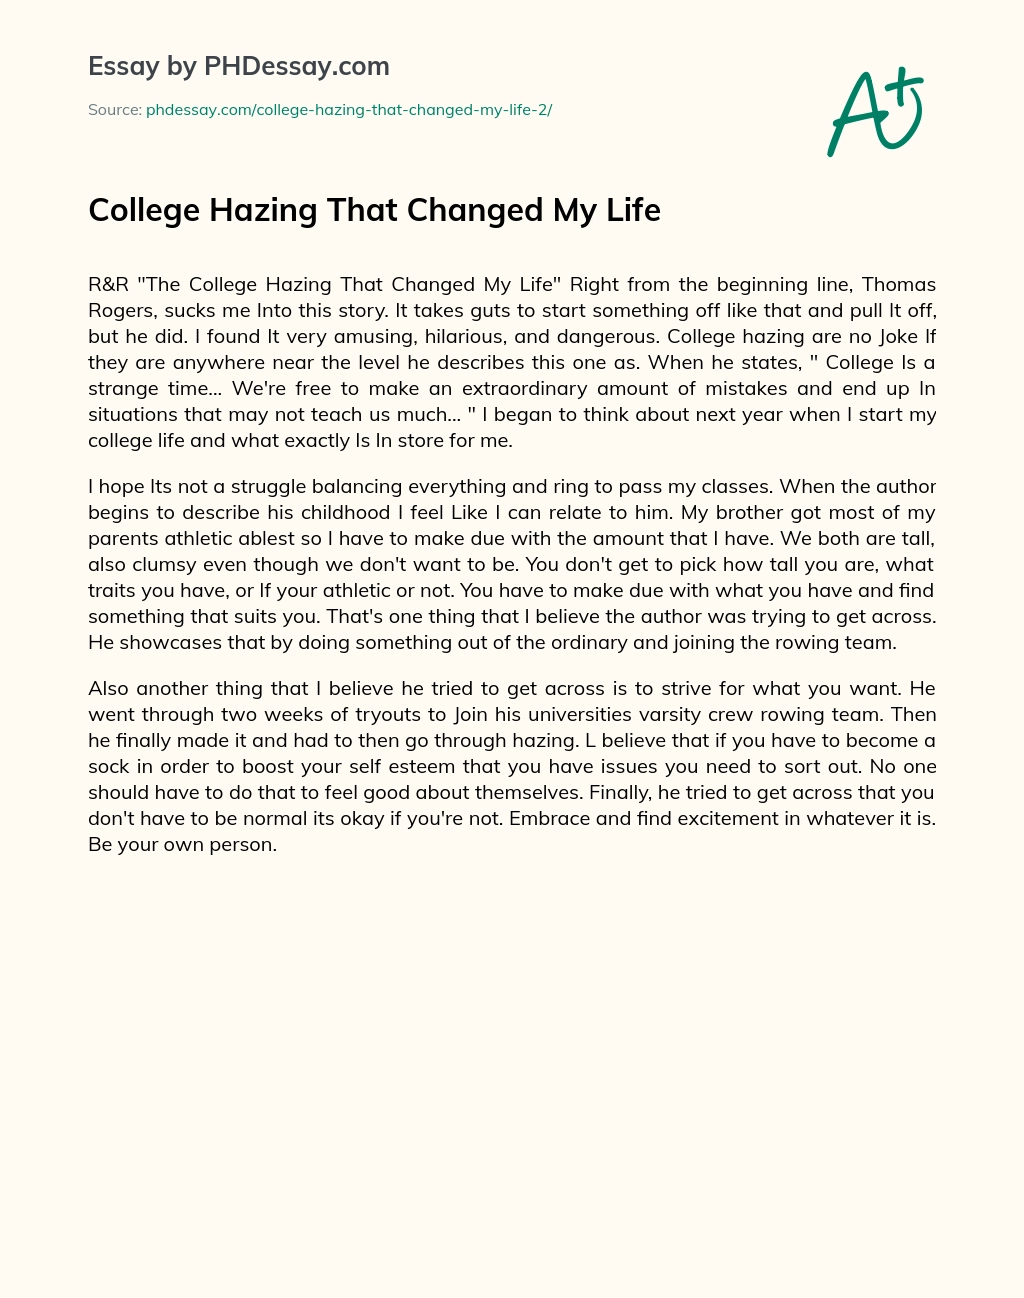 College Hazing That Changed My Life Phdessay Com Essay Research Paper 